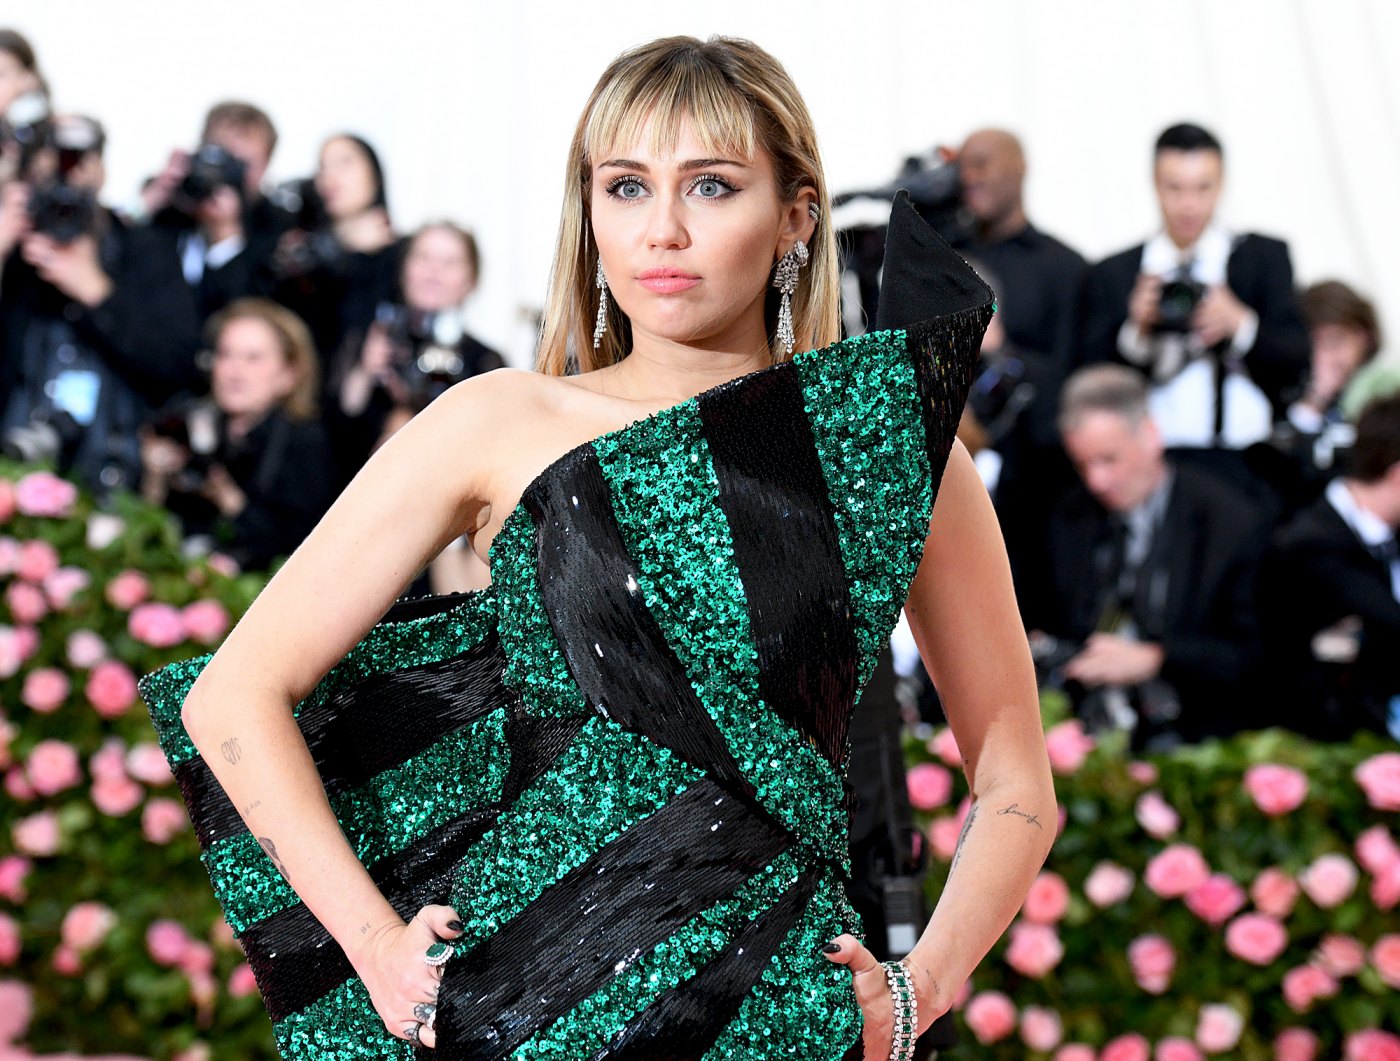 Miley Cyrus Clarifies Sexuality Comments After Backlash 